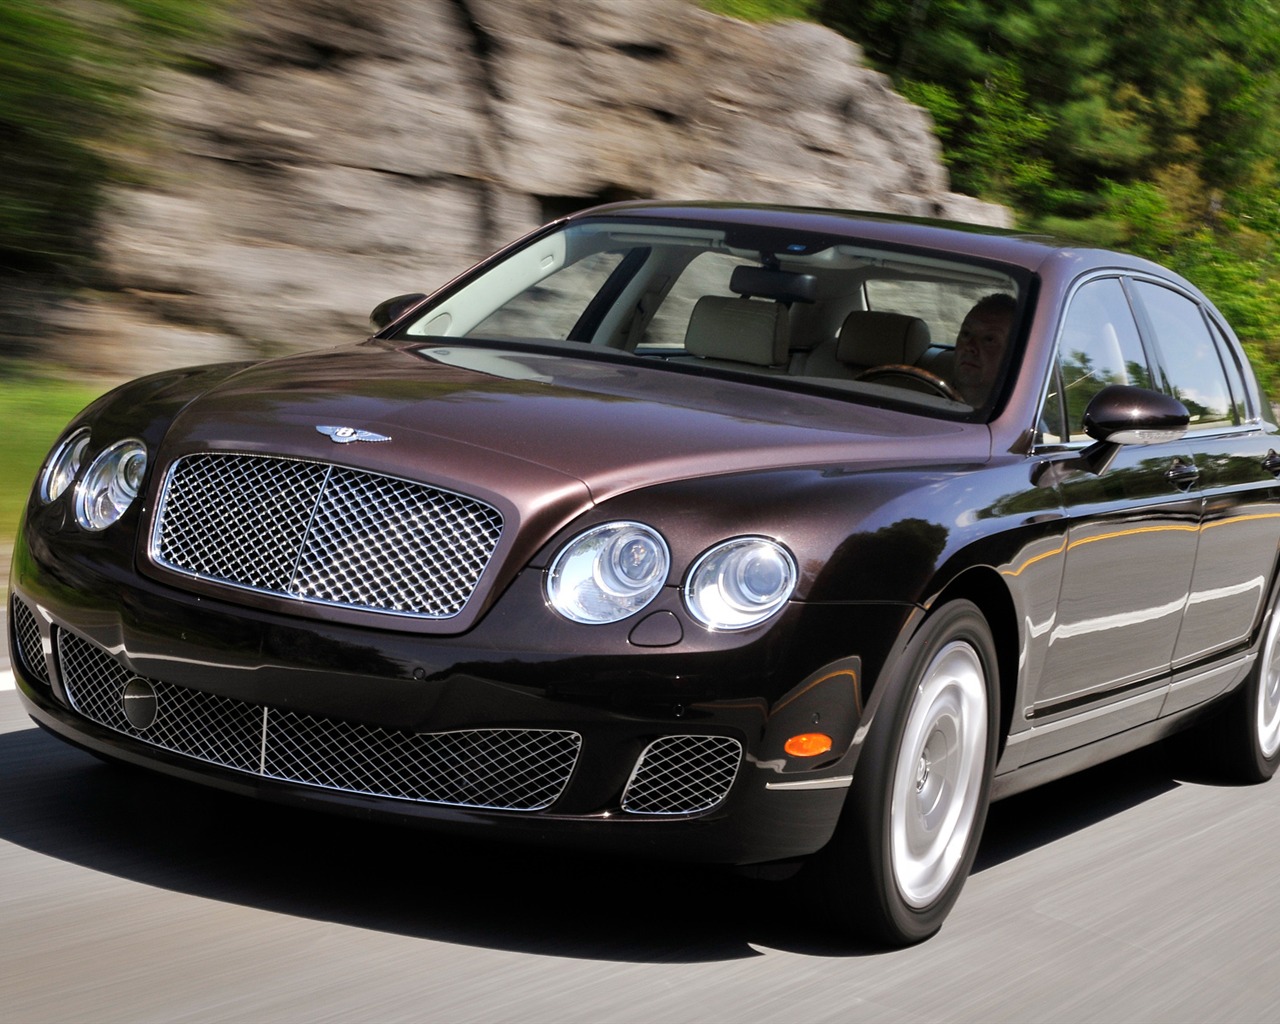 Bentley Continental Flying Spur - 2008 賓利 #16 - 1280x1024